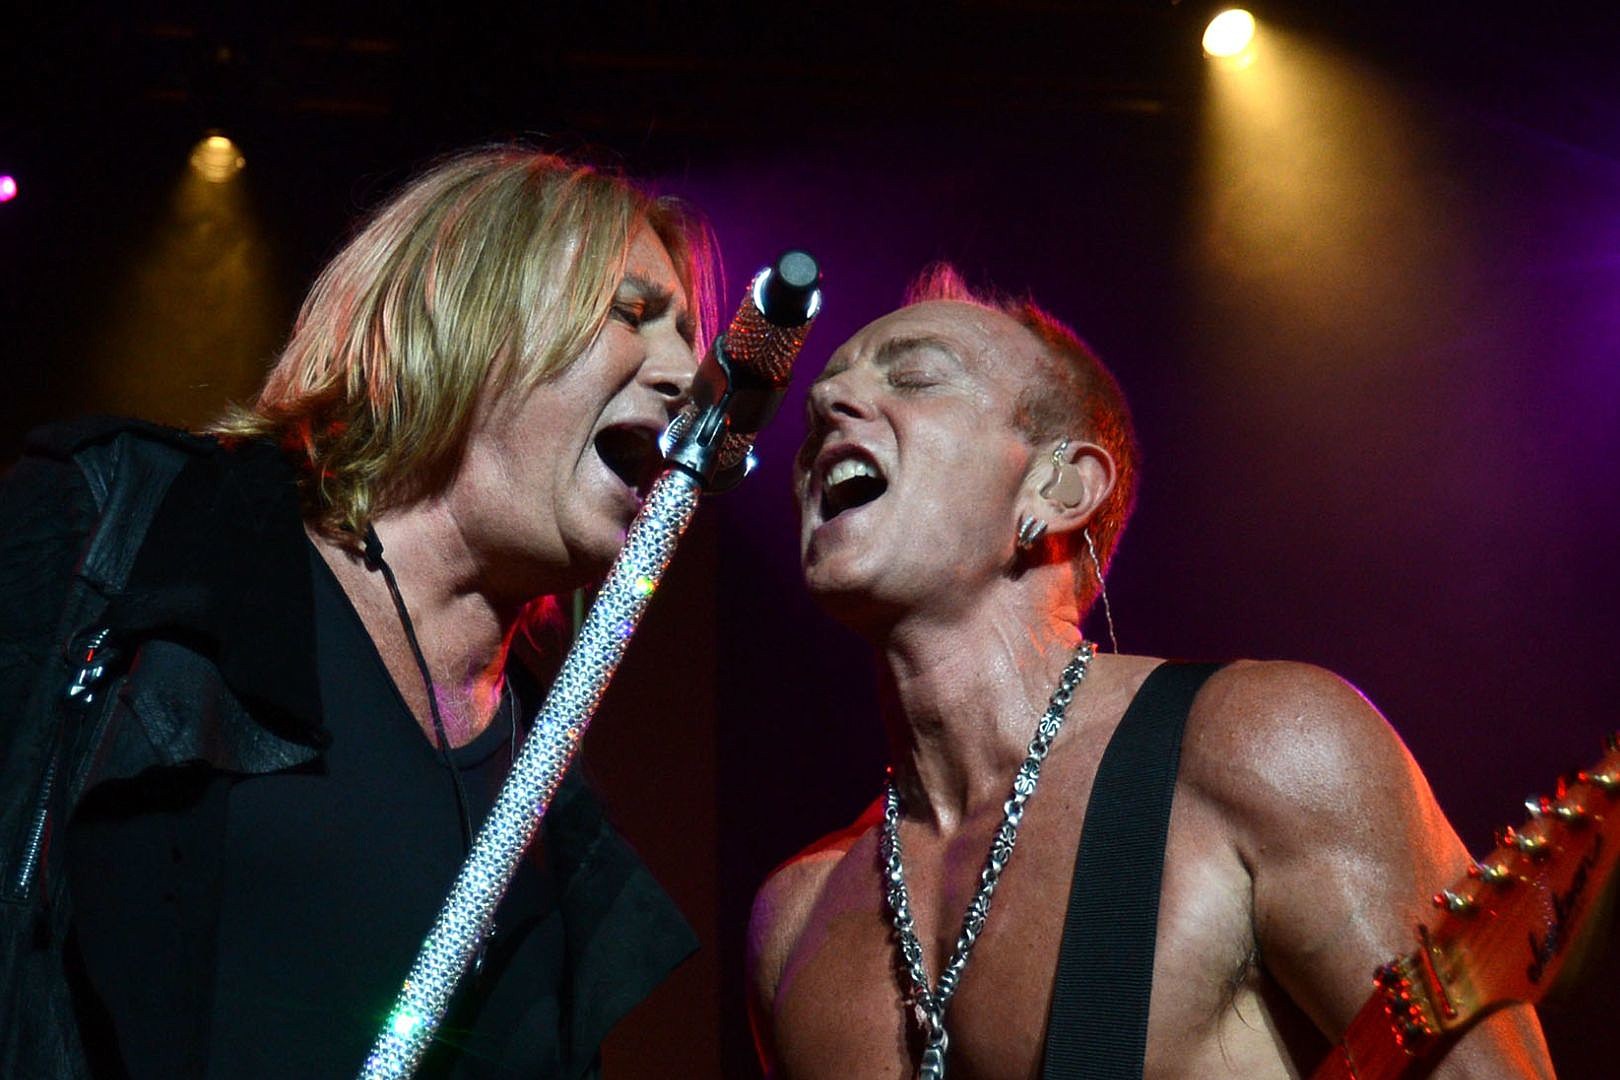 Def Leppard’s ‘Pour Some Sugar on Me’ Almost Wasn’t on ‘Hysteria’